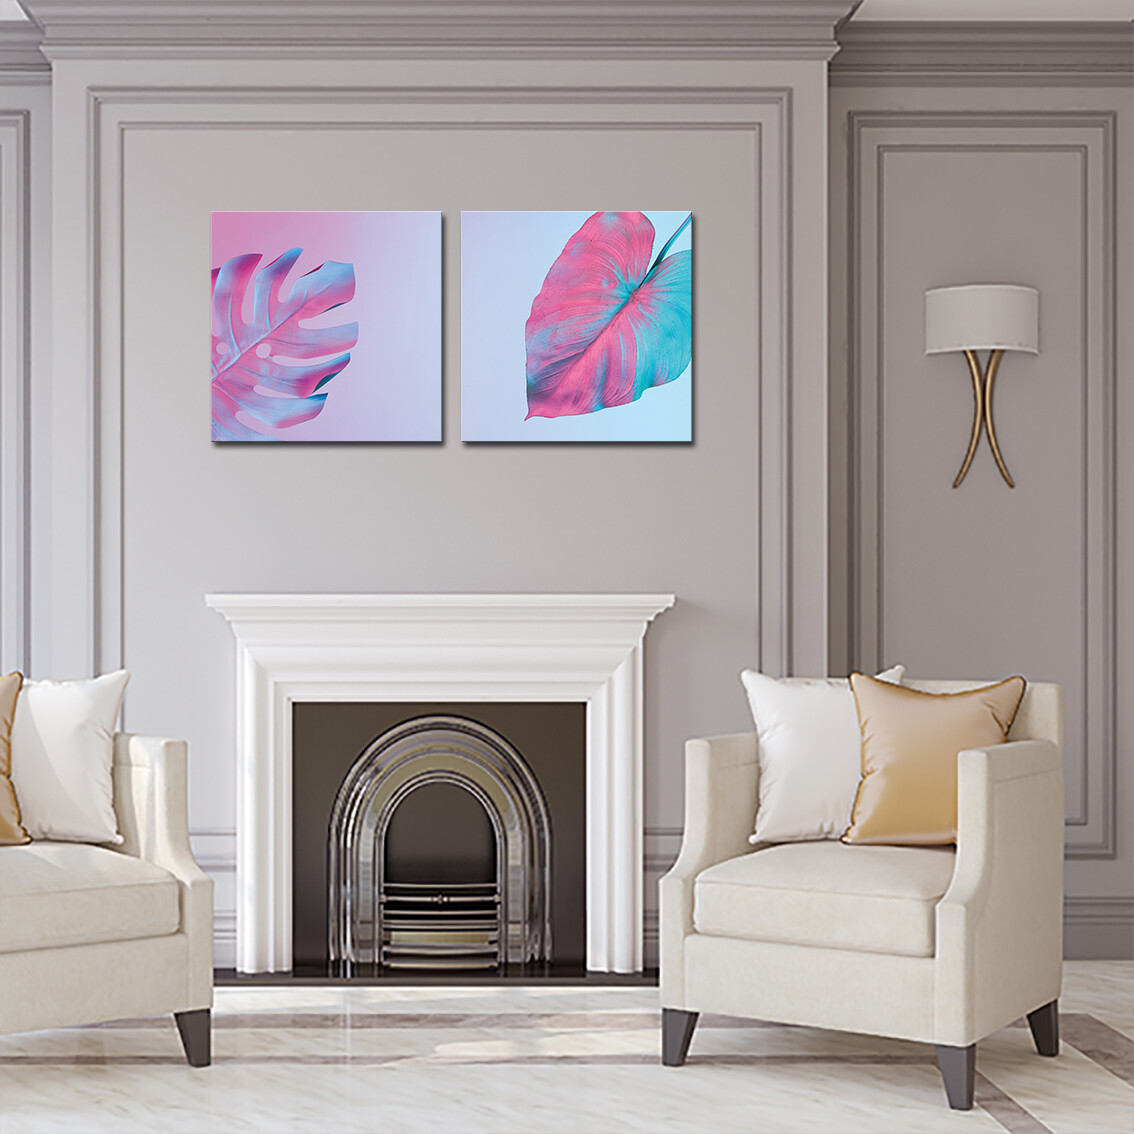 Palm Leaves  - Modern Luxury Wall art Printed on Acrylic Glass - Frameless and Ready to Hang